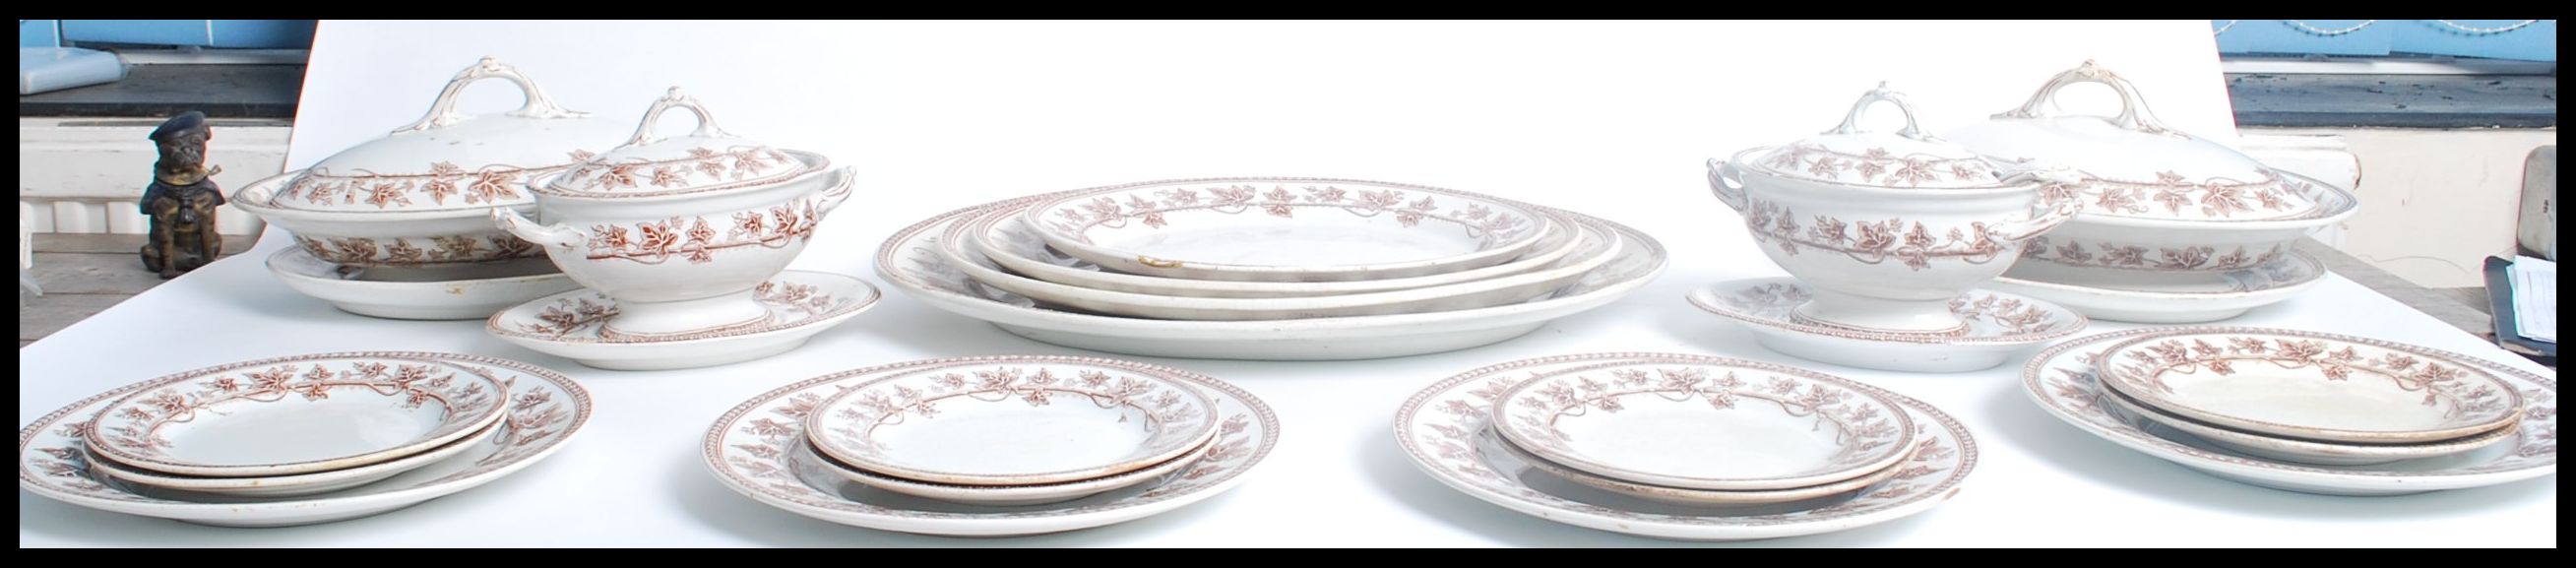 A 19th century Victorian Wedgwood Ivy pattern dinner service consisting of tureens, plates